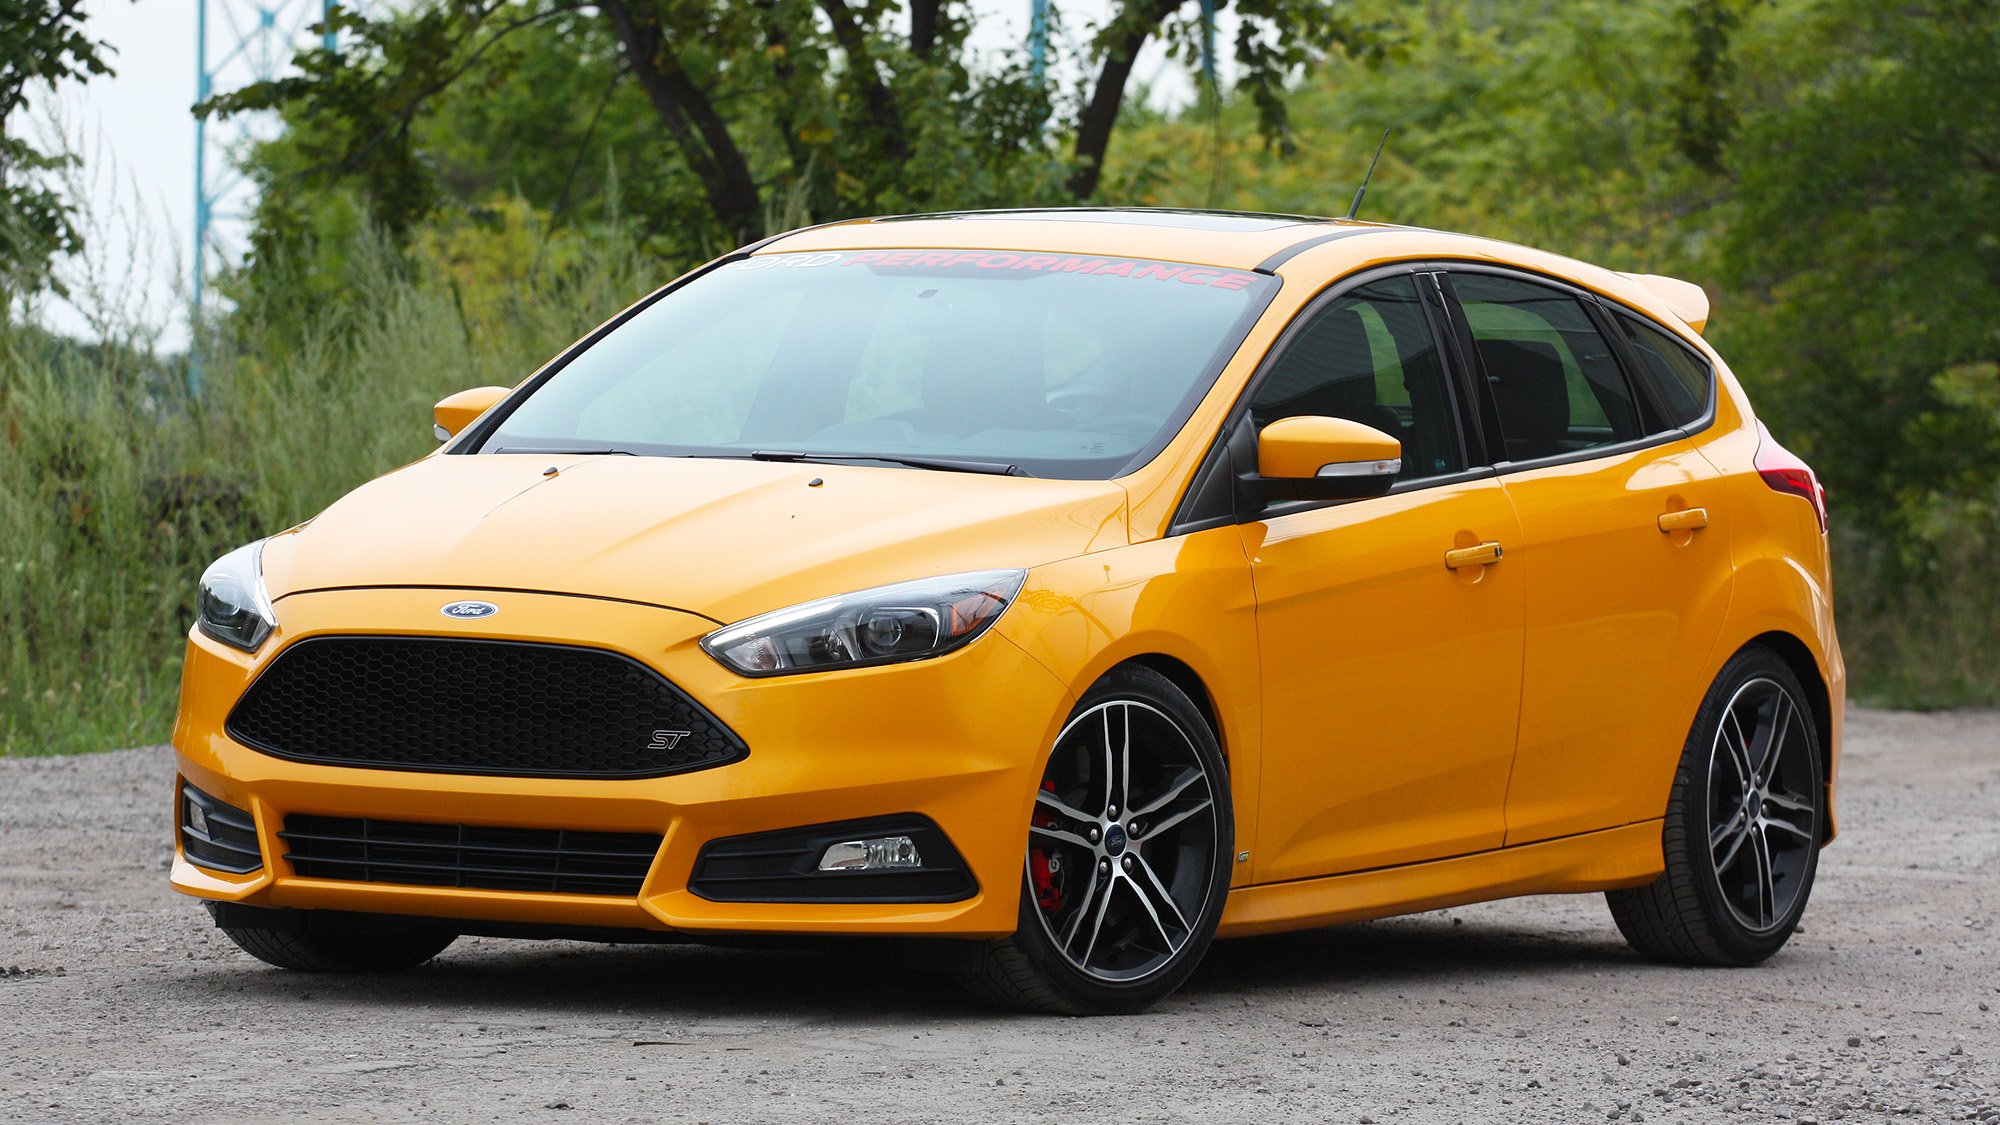 2015, Ford, Focus, St, Cars, 2016 Wallpaper